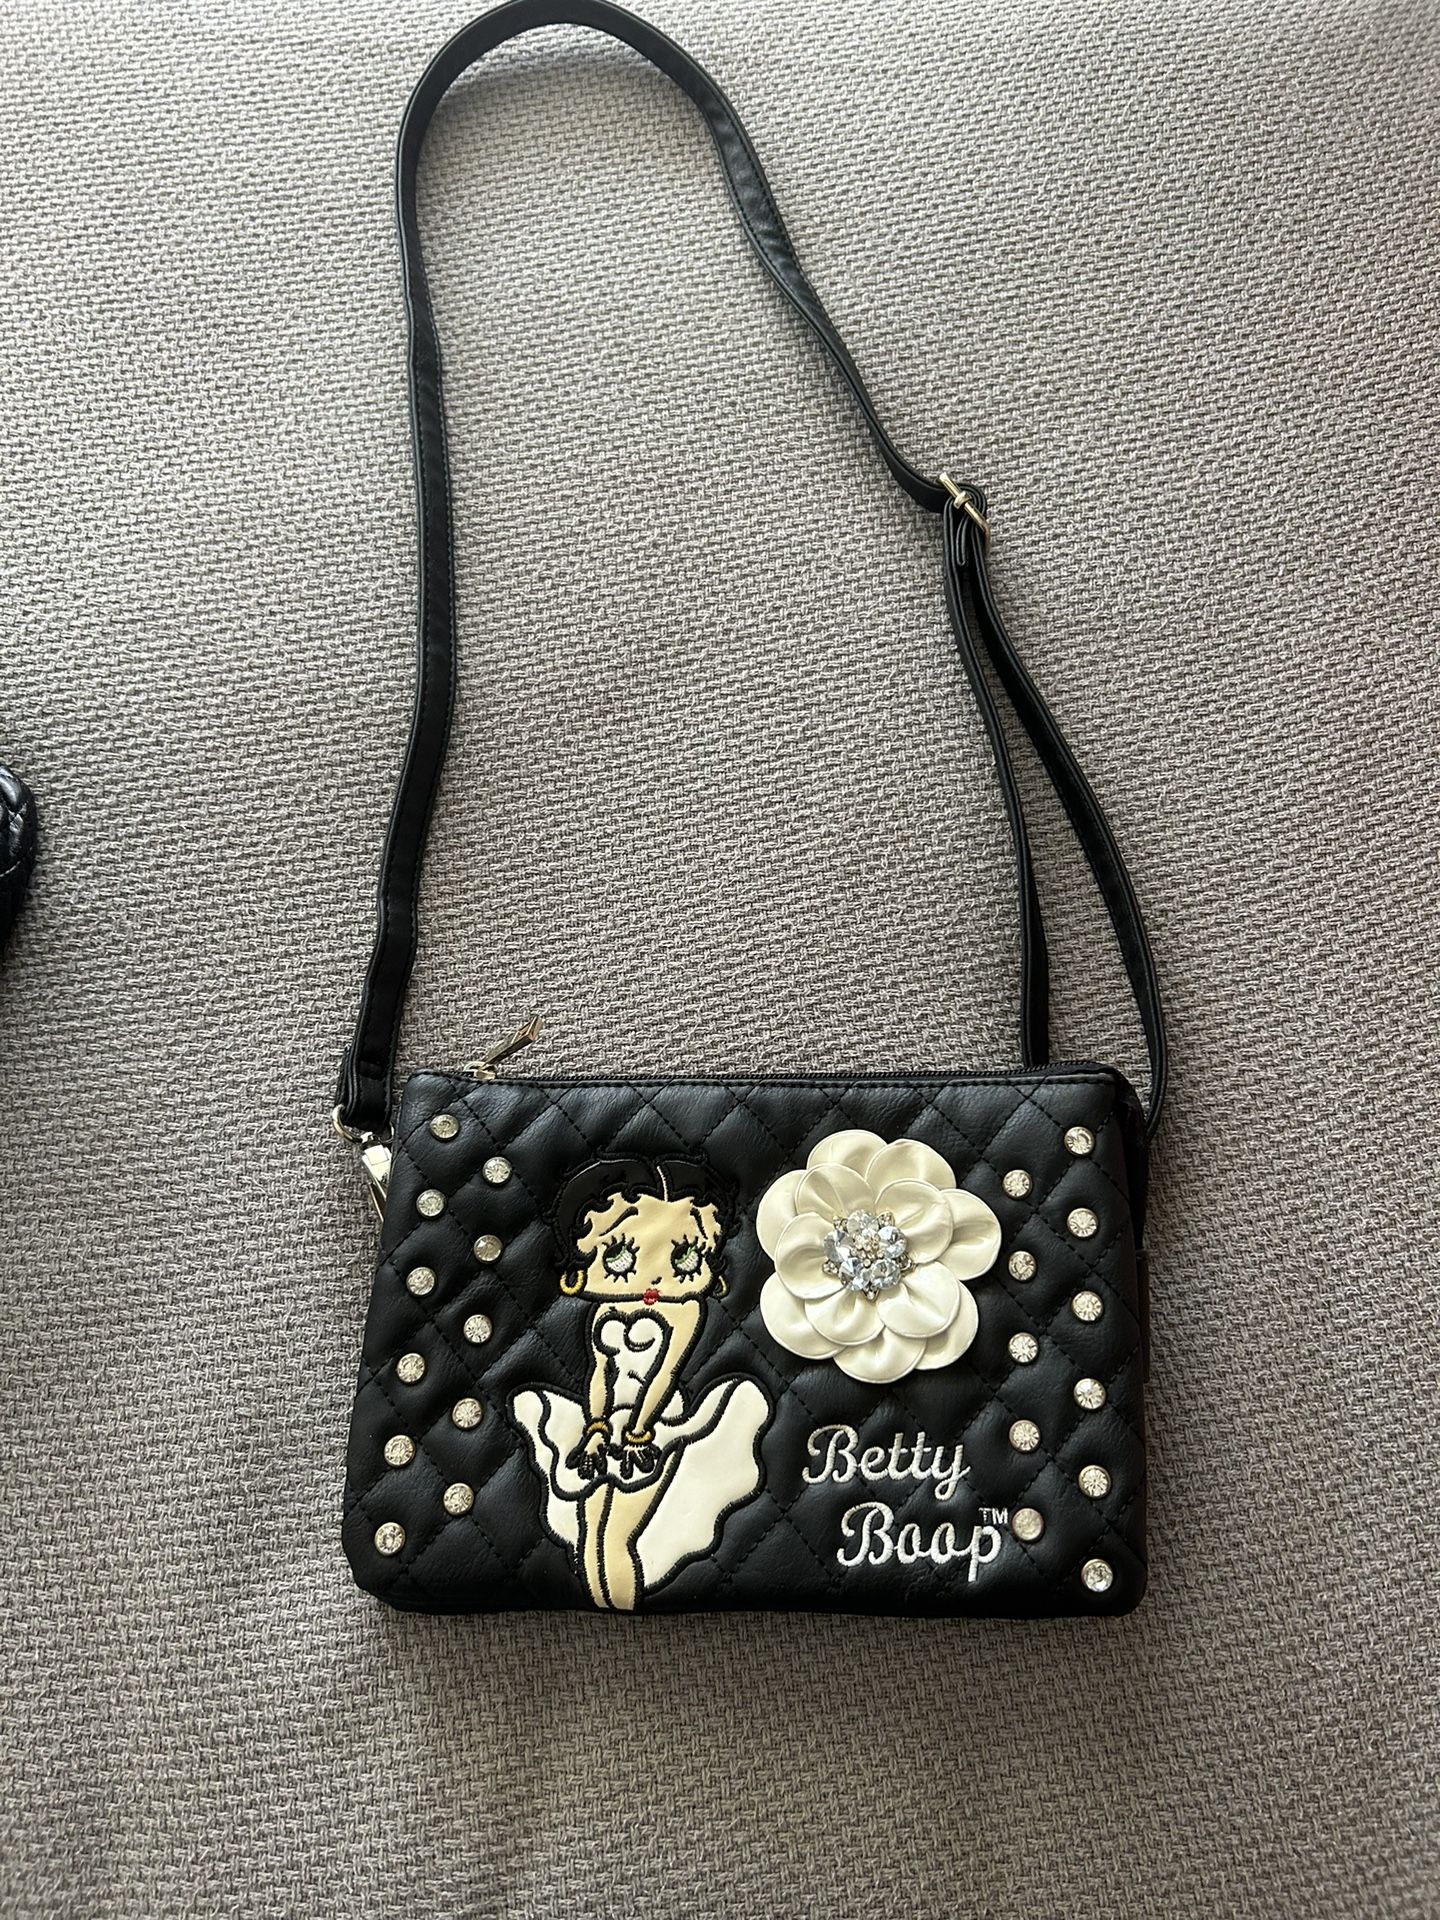 Brand new Betty boot purse with strap